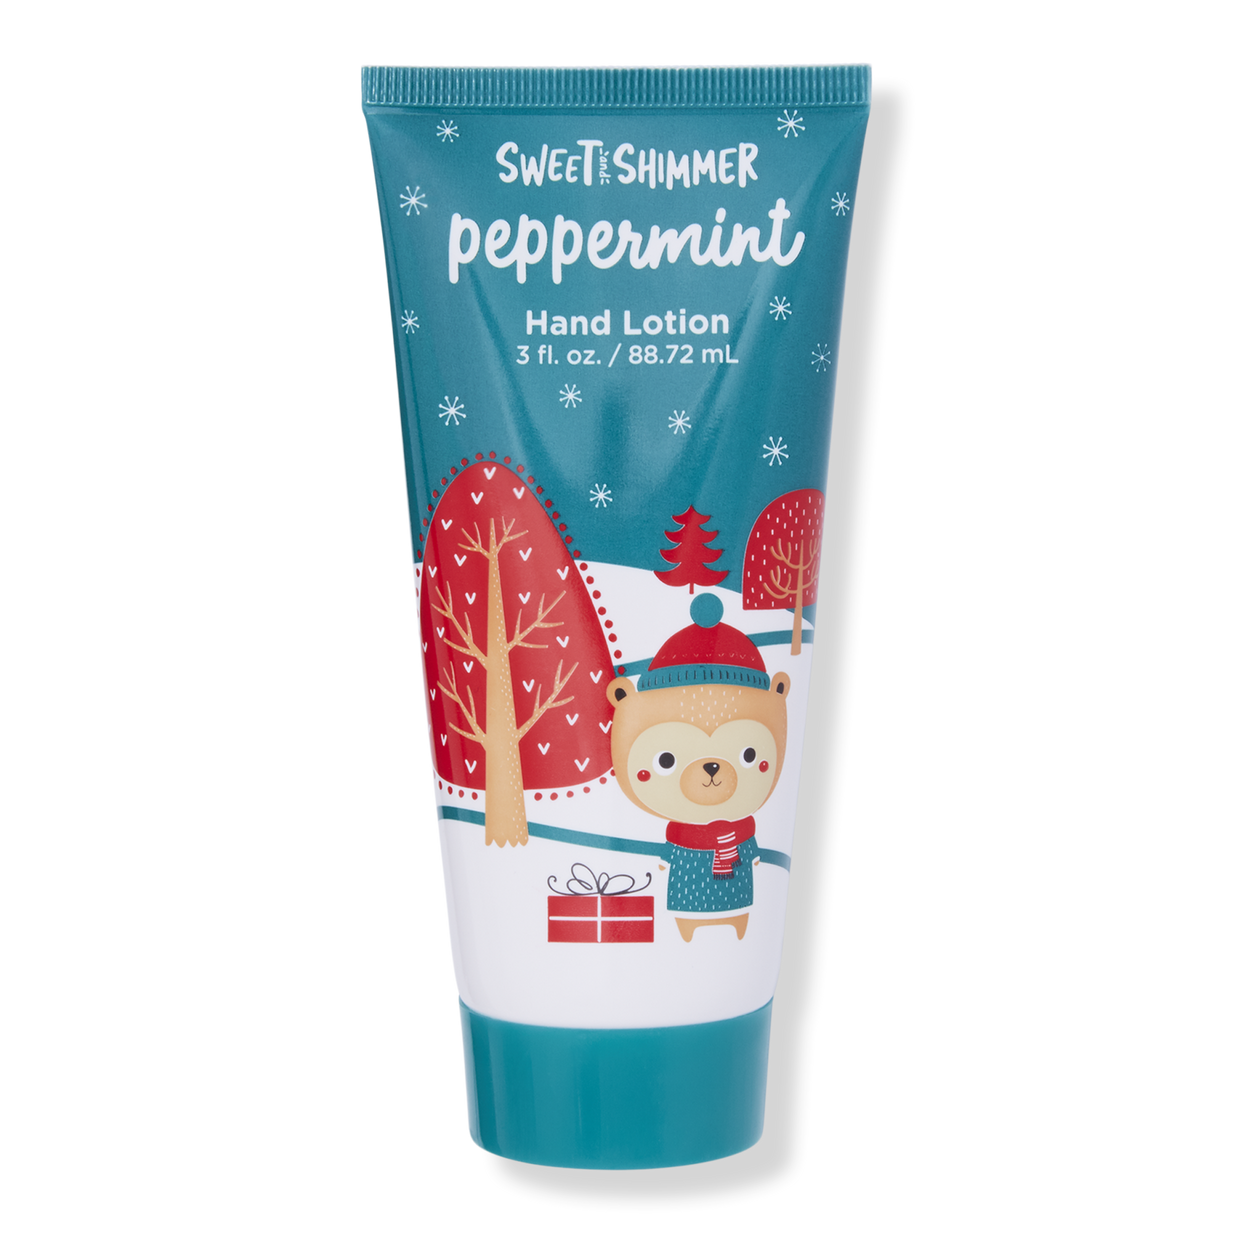 Peppermint Hand Lotion - Sweet & Shimmer